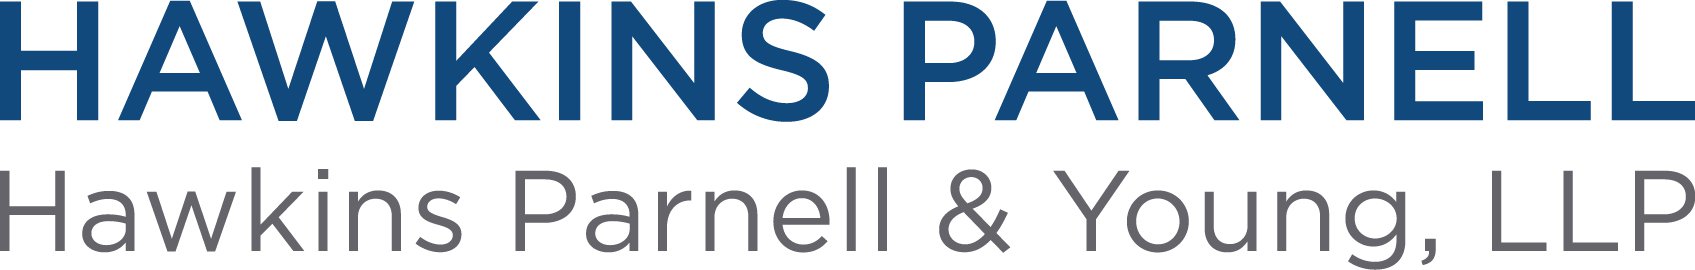 Hawkins Parnell & Young, LLP